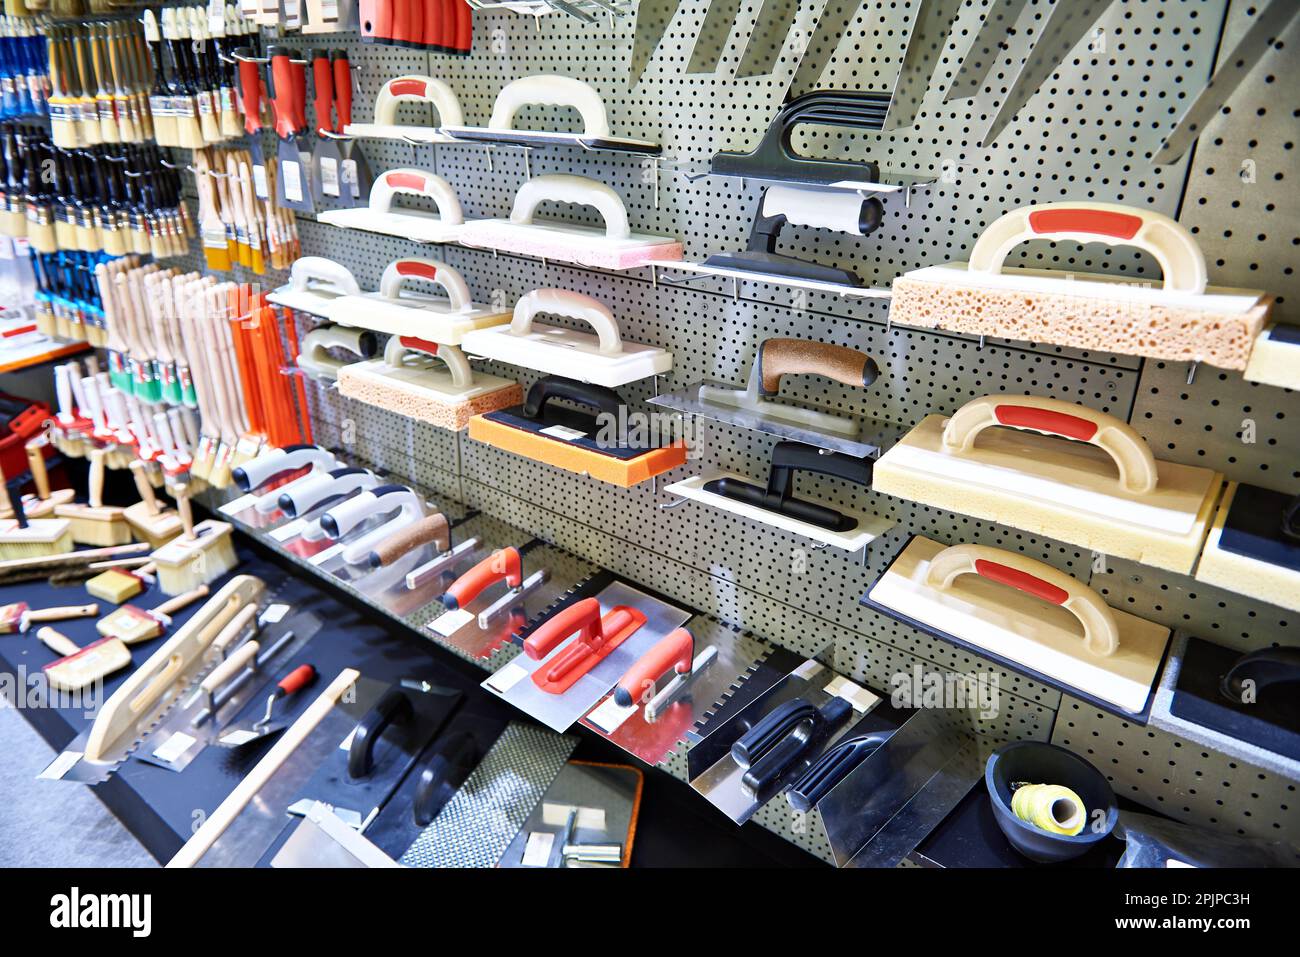 Building tools in hardware store Stock Photo